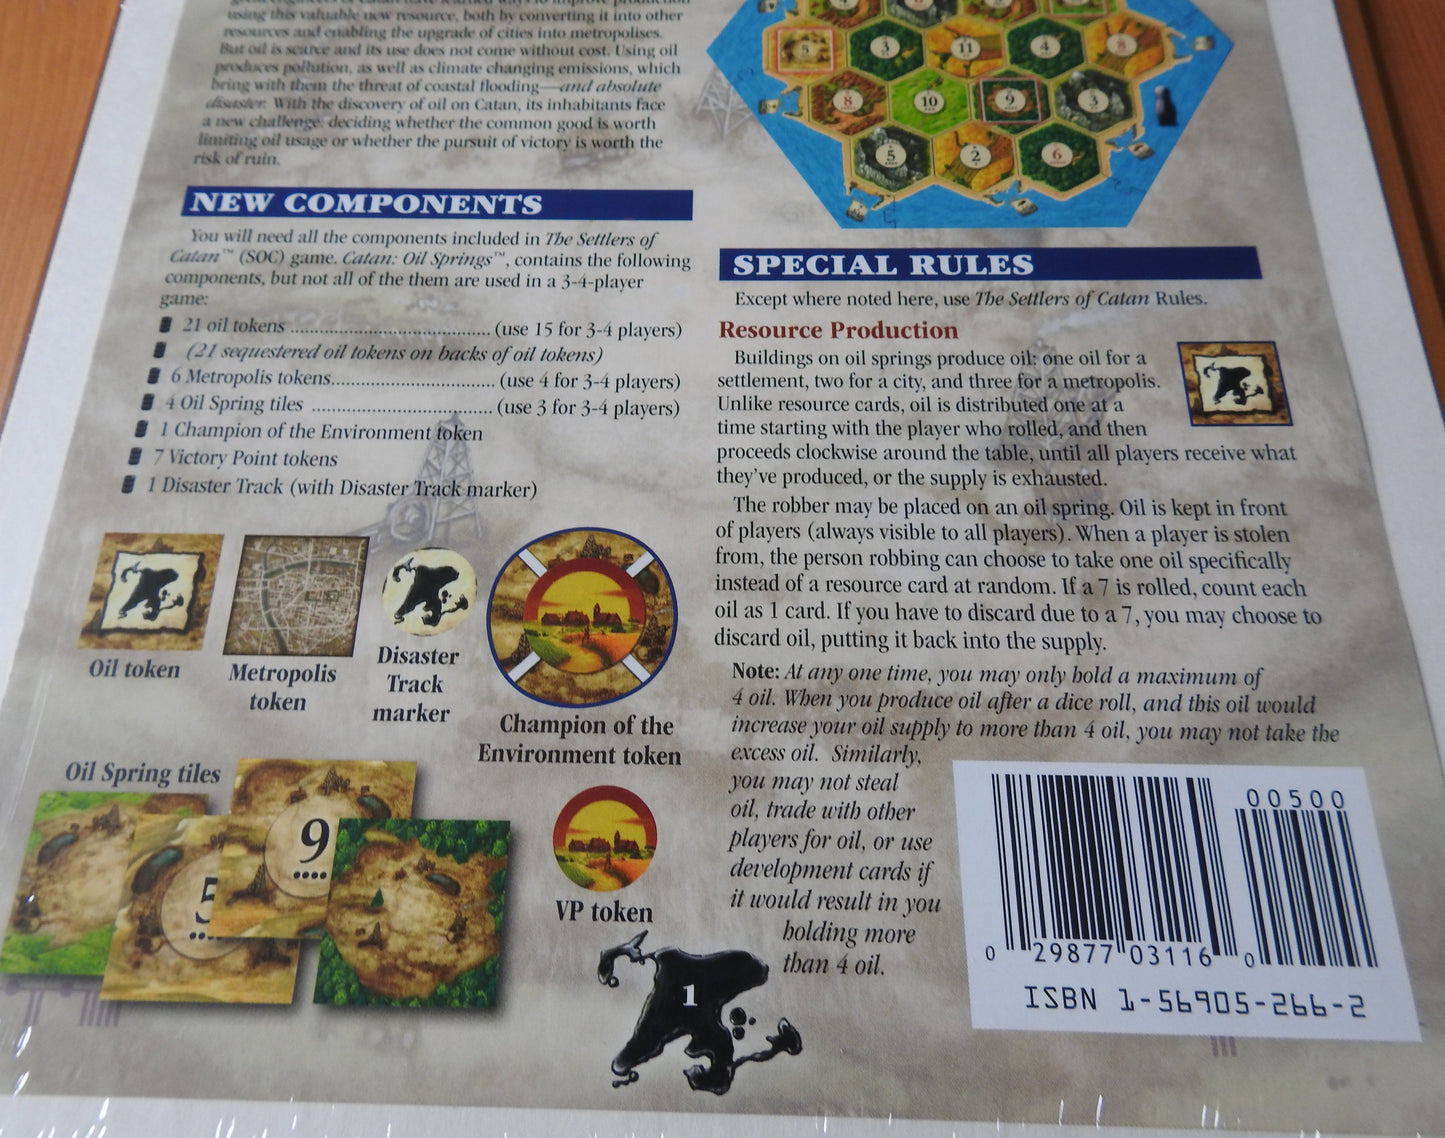 Closer view of the special rules text in the instructions as well as the list of new components in this Catan Scenarios Oil Springs mini expansion.